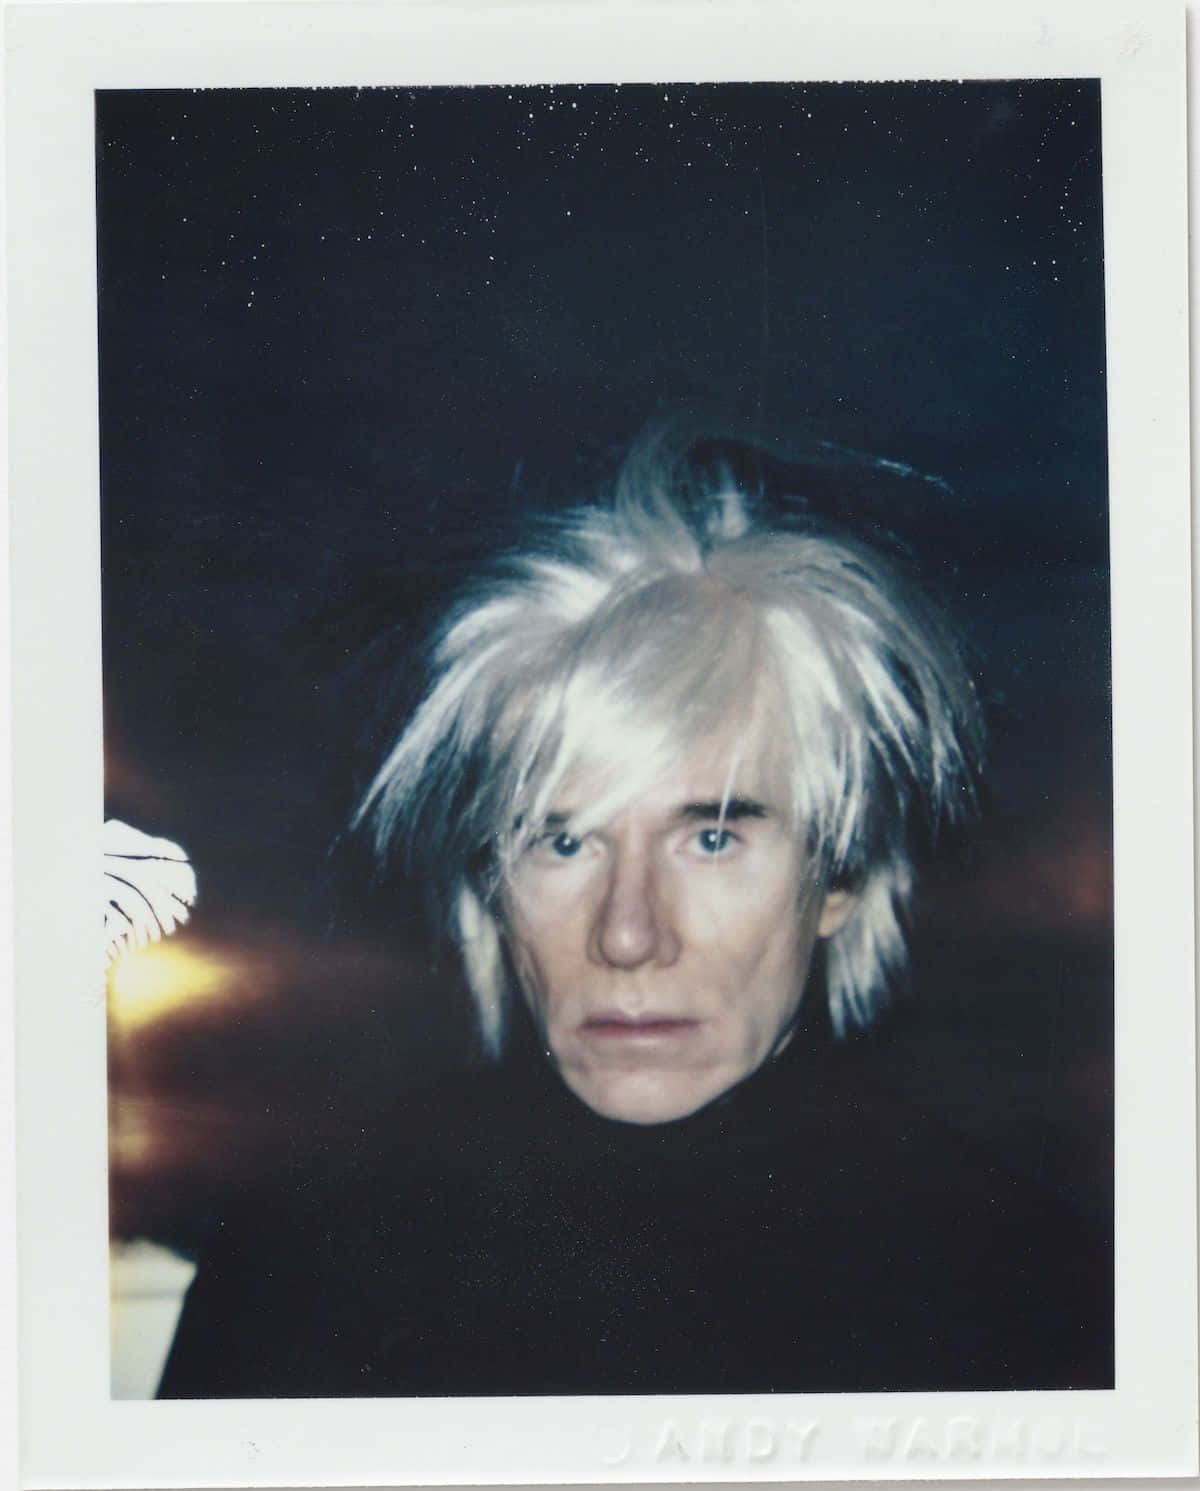 A Portrait of the Iconic Artist Andy Warhol